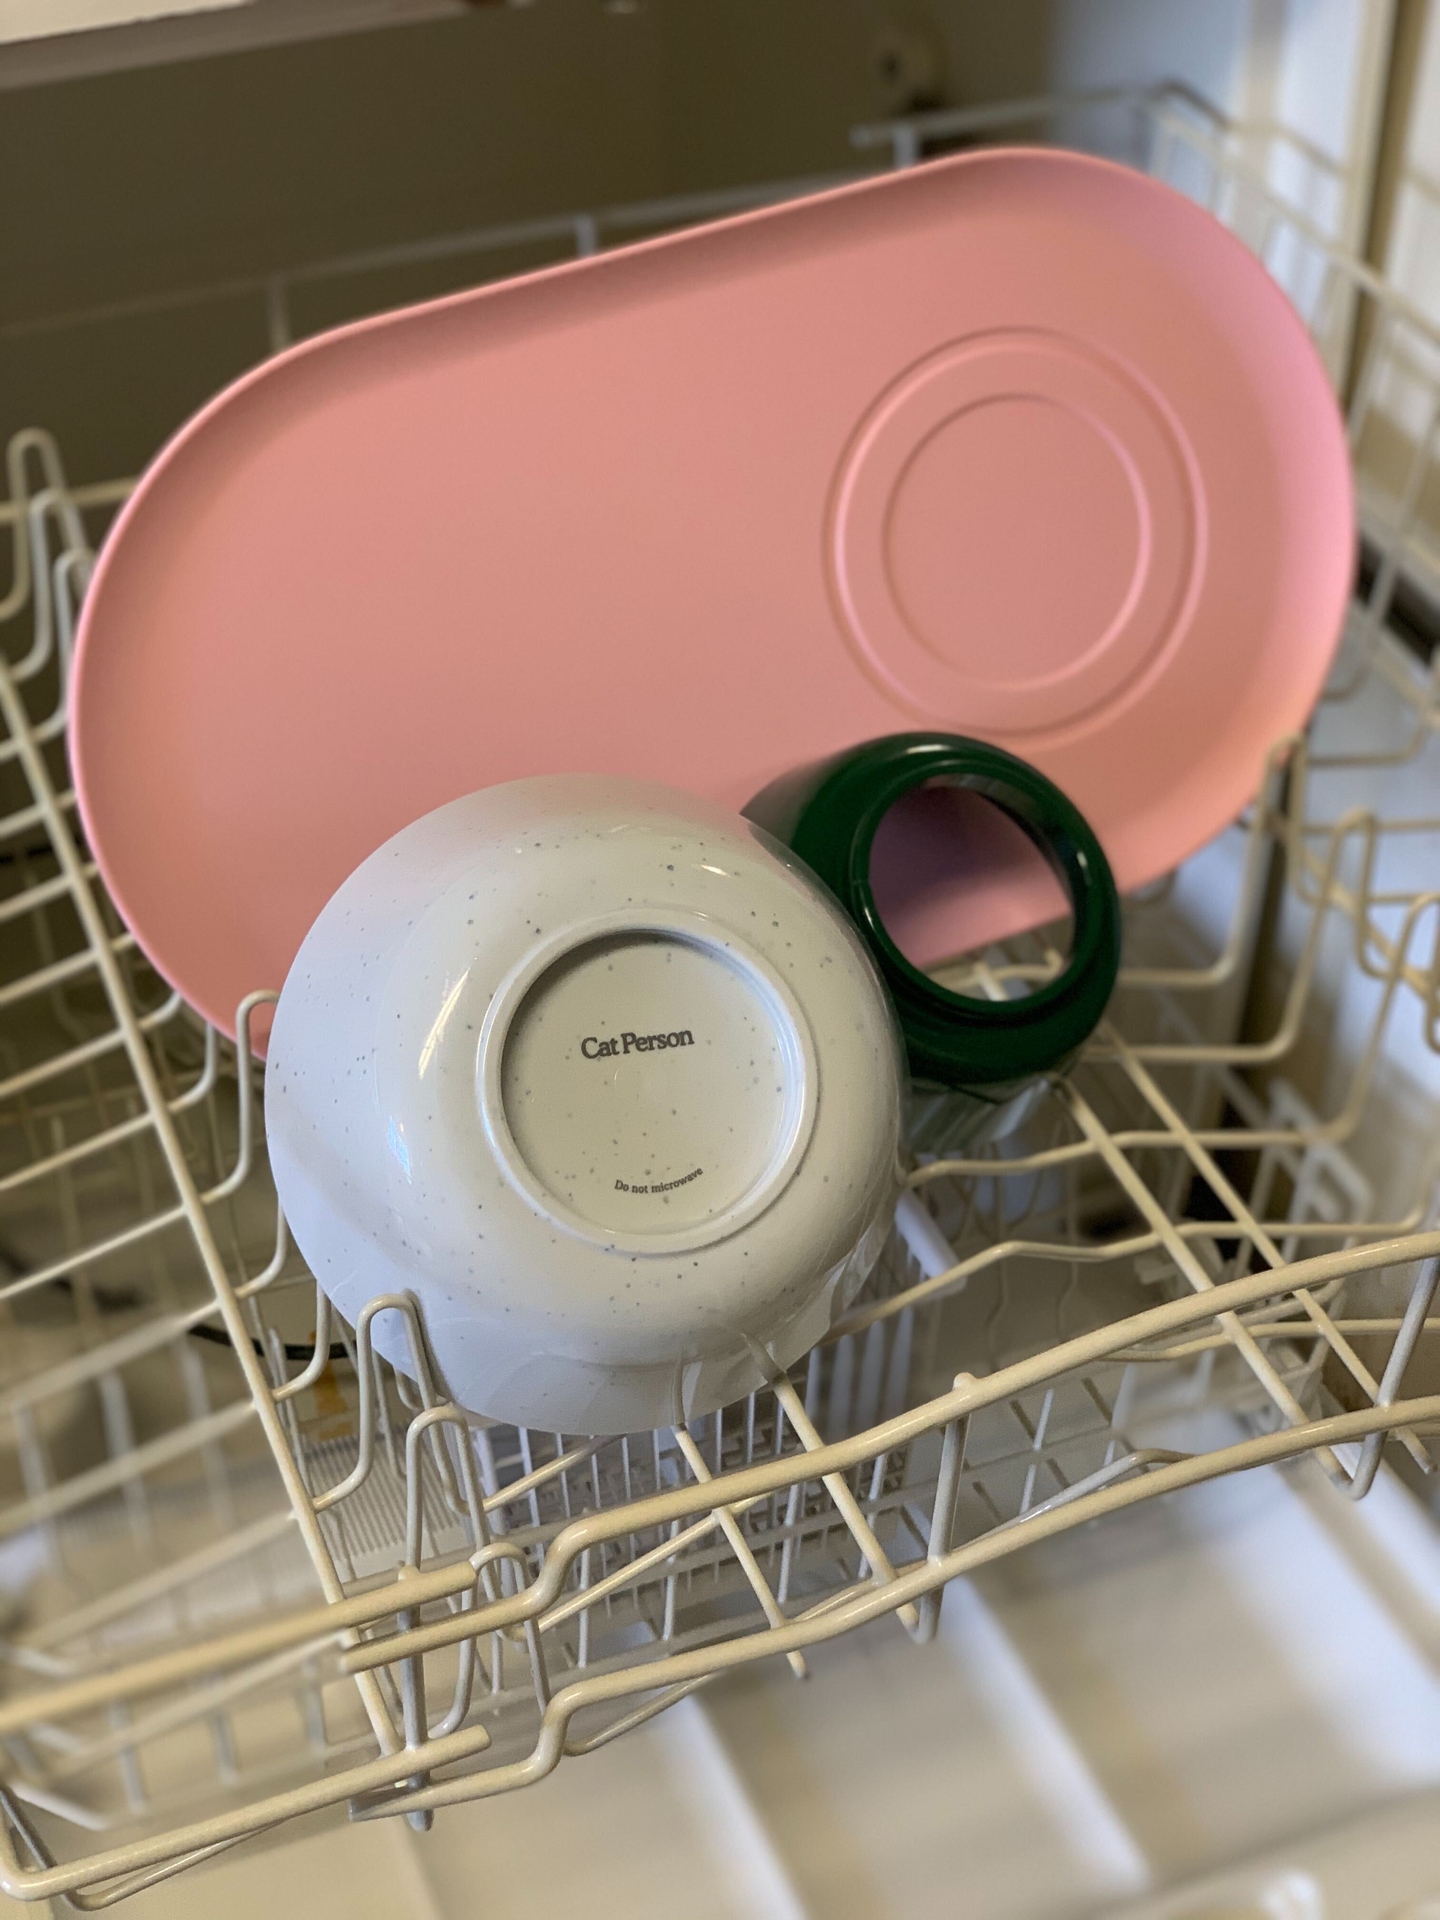 Cat Person Mesa Bowl components in the top rack of a dishwasher